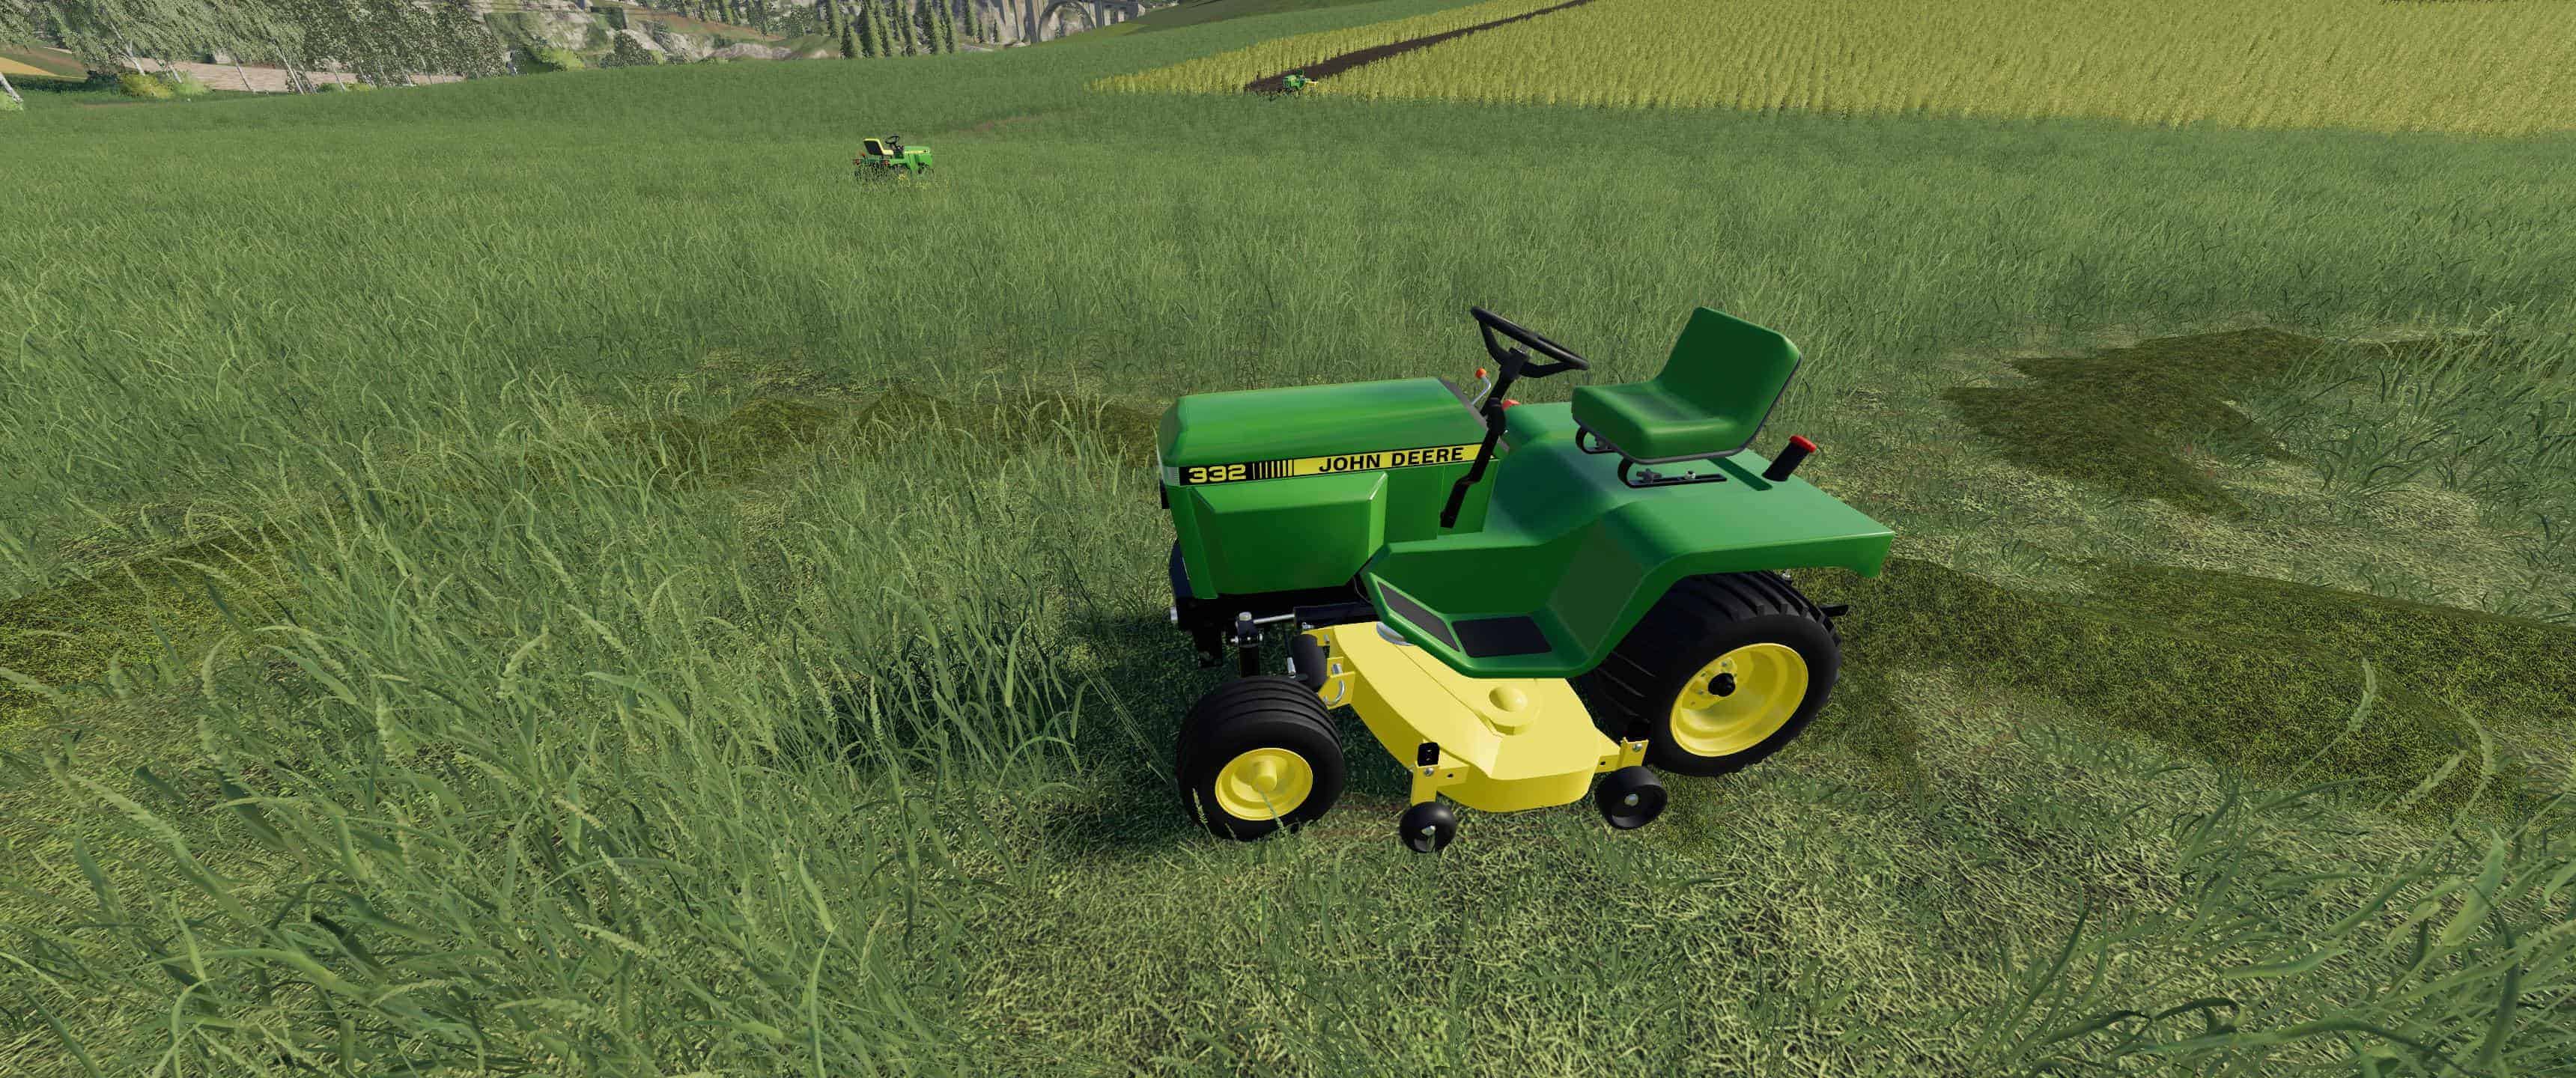 John Deere 332 Lawn Tractor With Lawn Mower And Garden V2 0 Mod